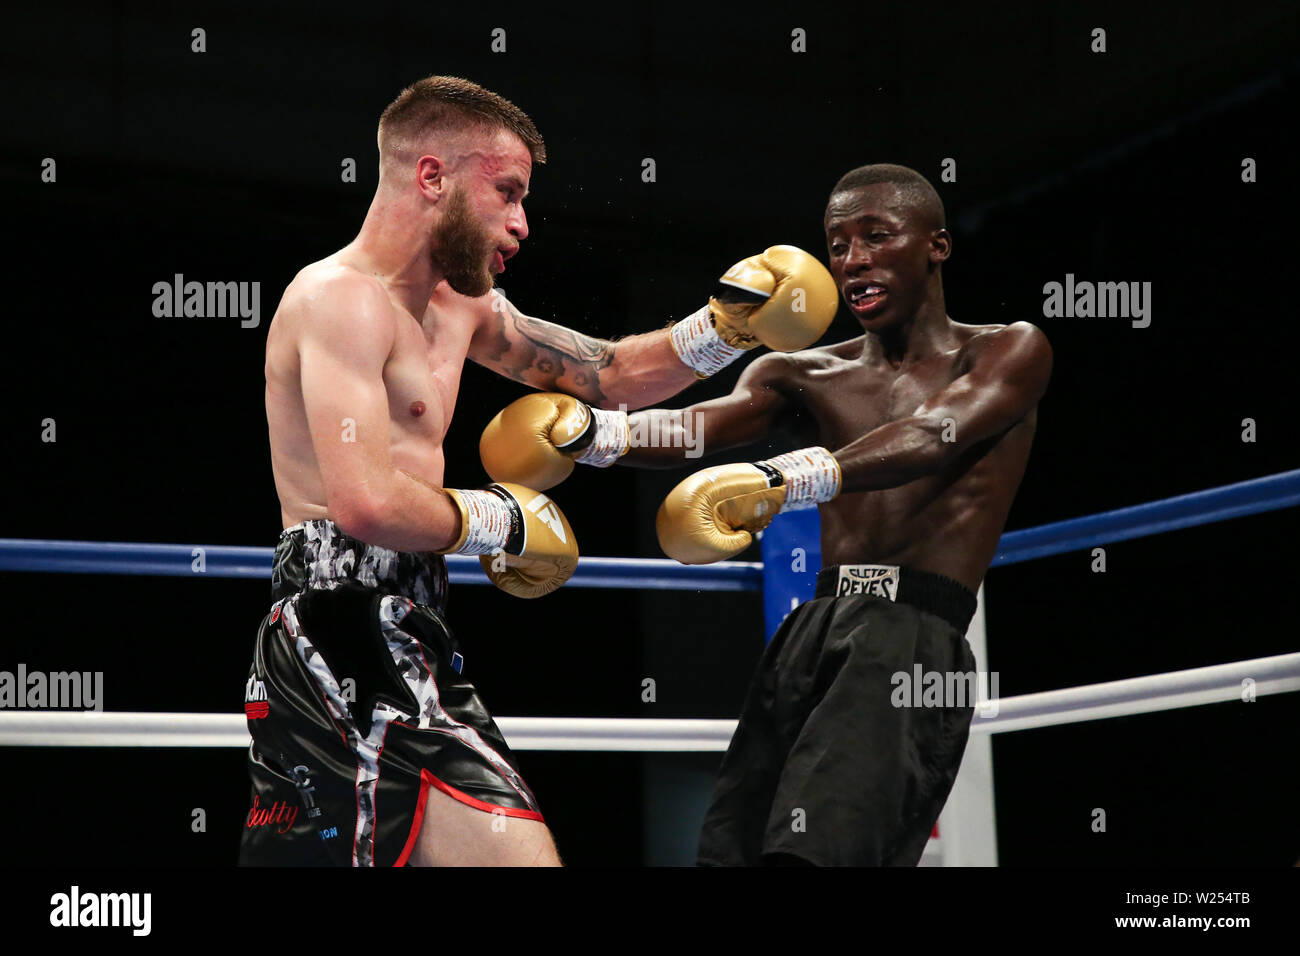 Tommy Frank lands a big left hook on John Chuwa during the Dennis Hobson Promotions boxing event at Ponds Forge, Sheffield. Picture date: 5th July 201 Stock Photo